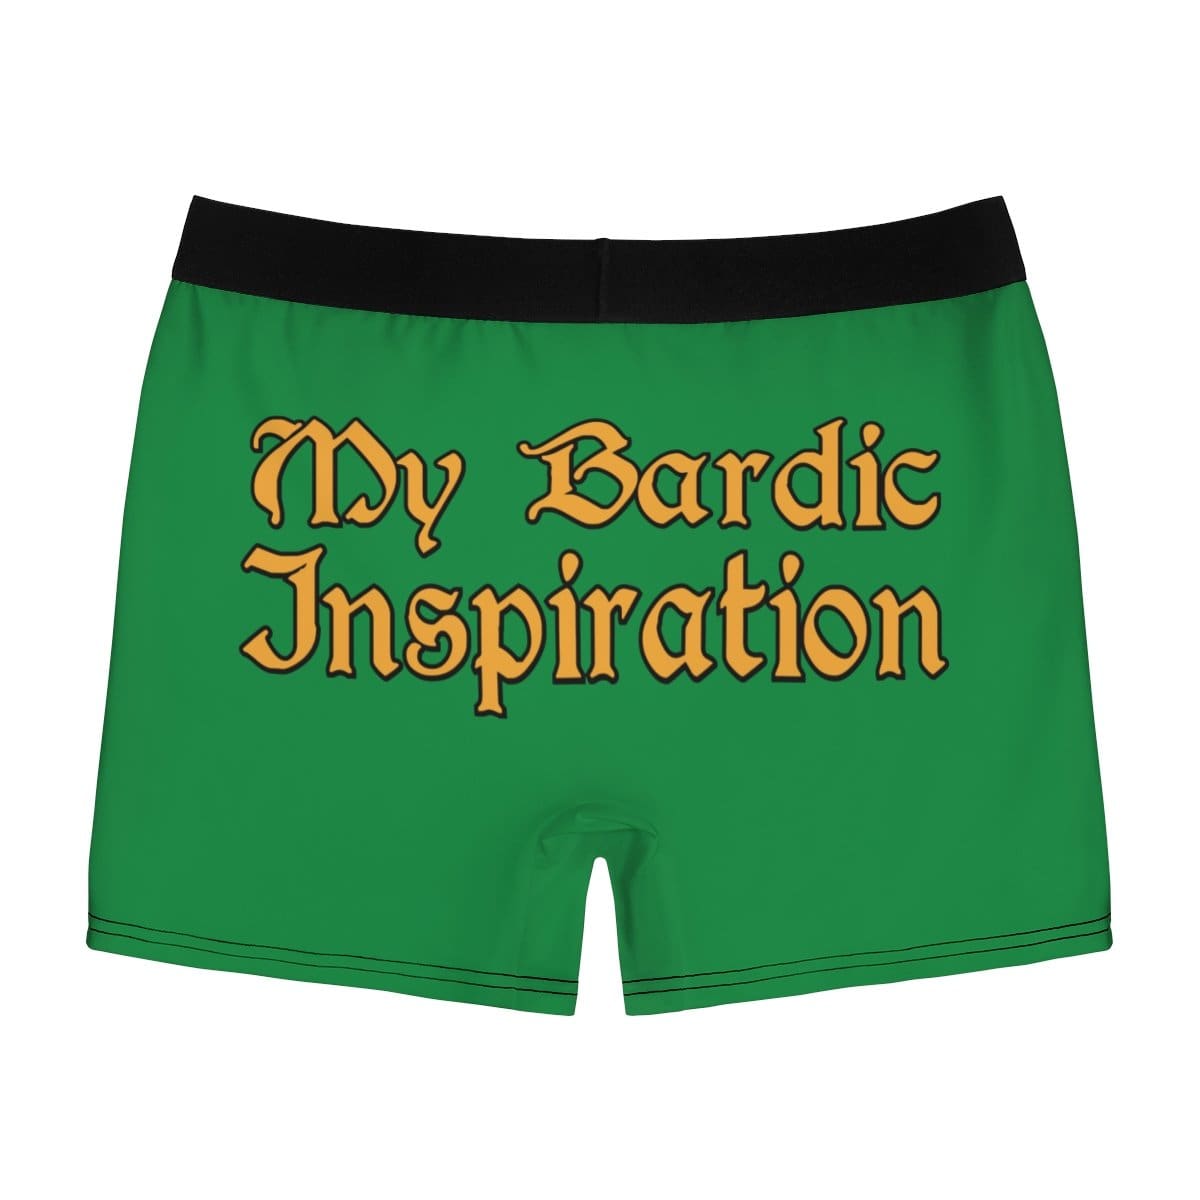 My Bardic Inspiration - Green Boxer Briefs - All Over Prints